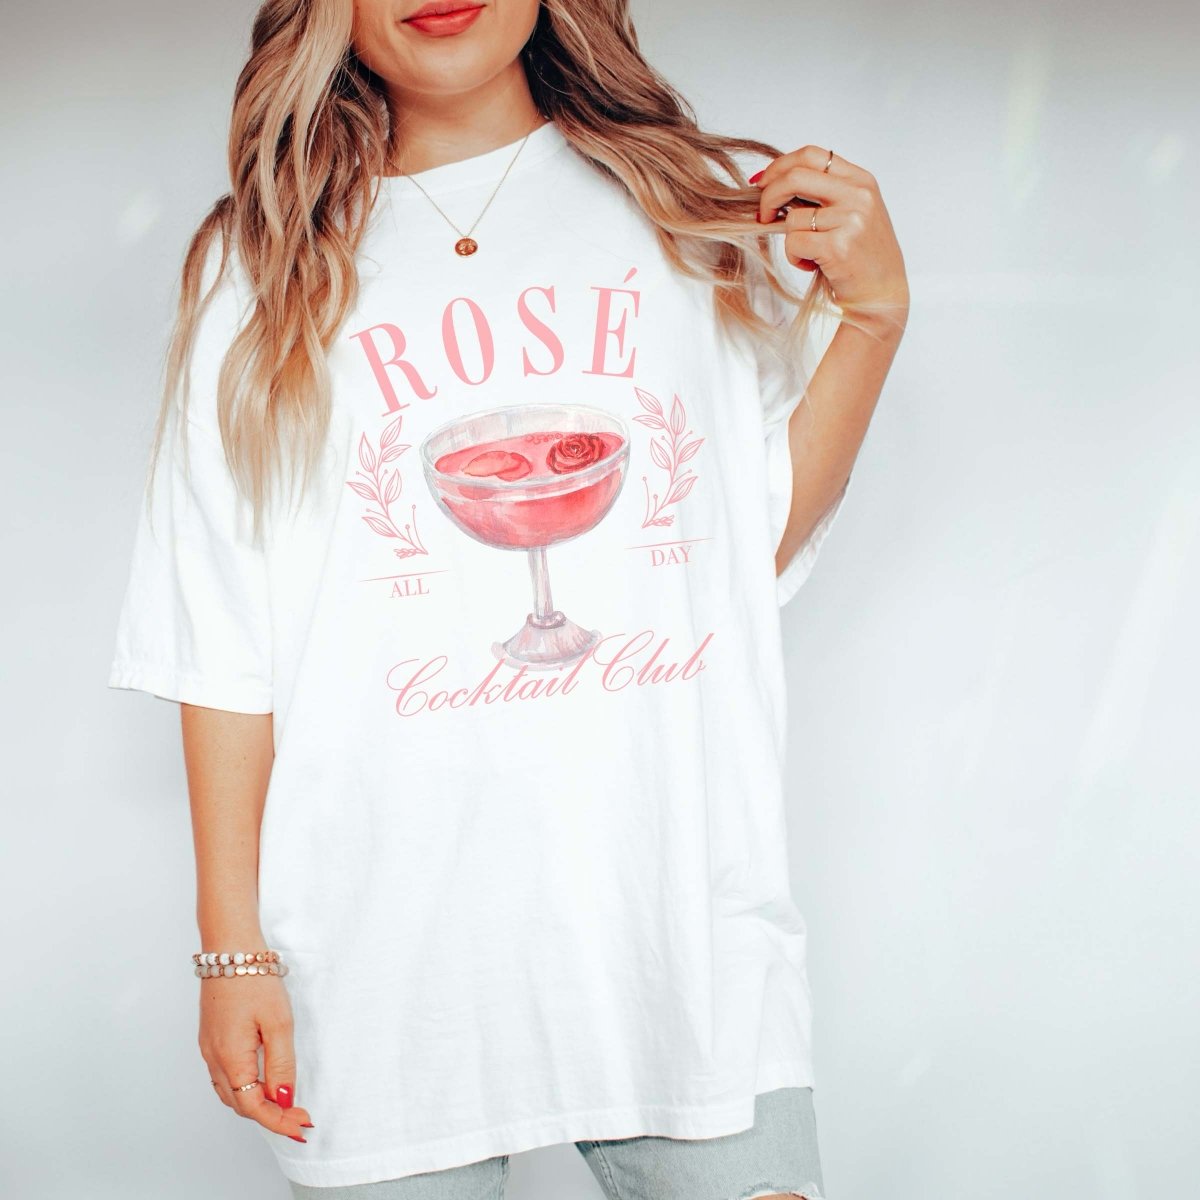 Rose' All Day Cocktail Club Tee - Limeberry Designs